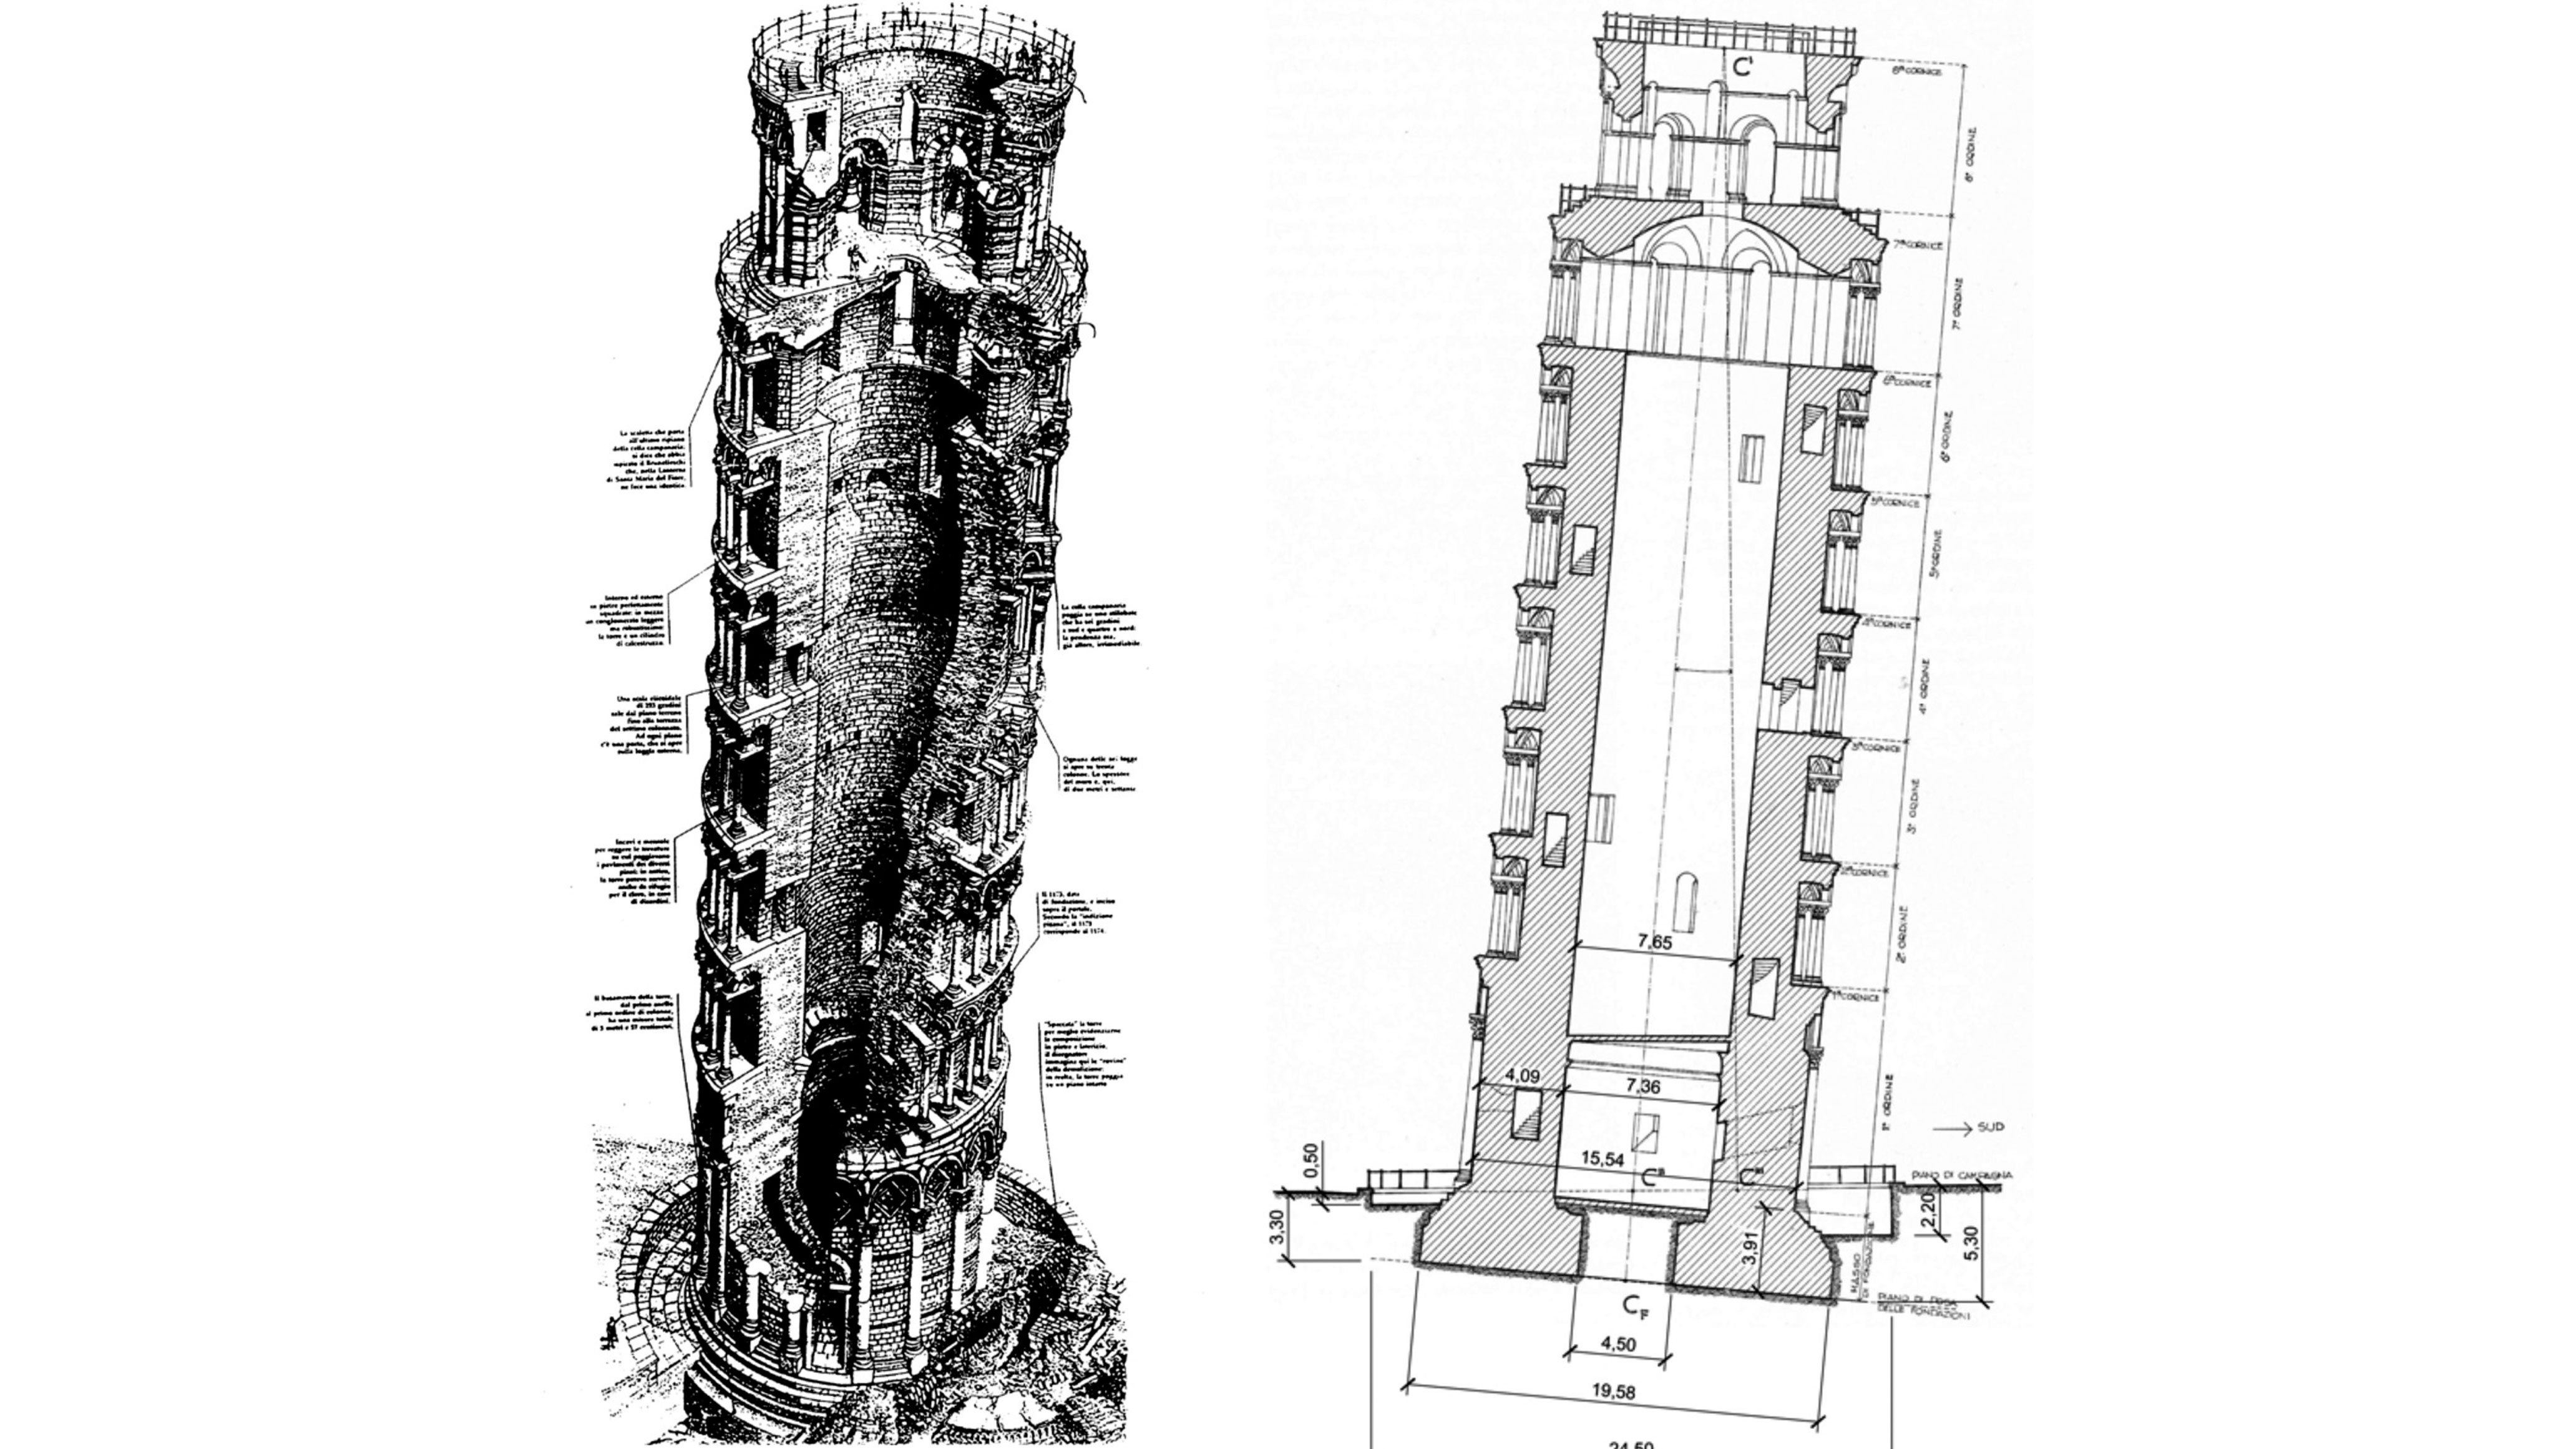 The restoration of the LEANING TOWER OF PISA | Trevi 3